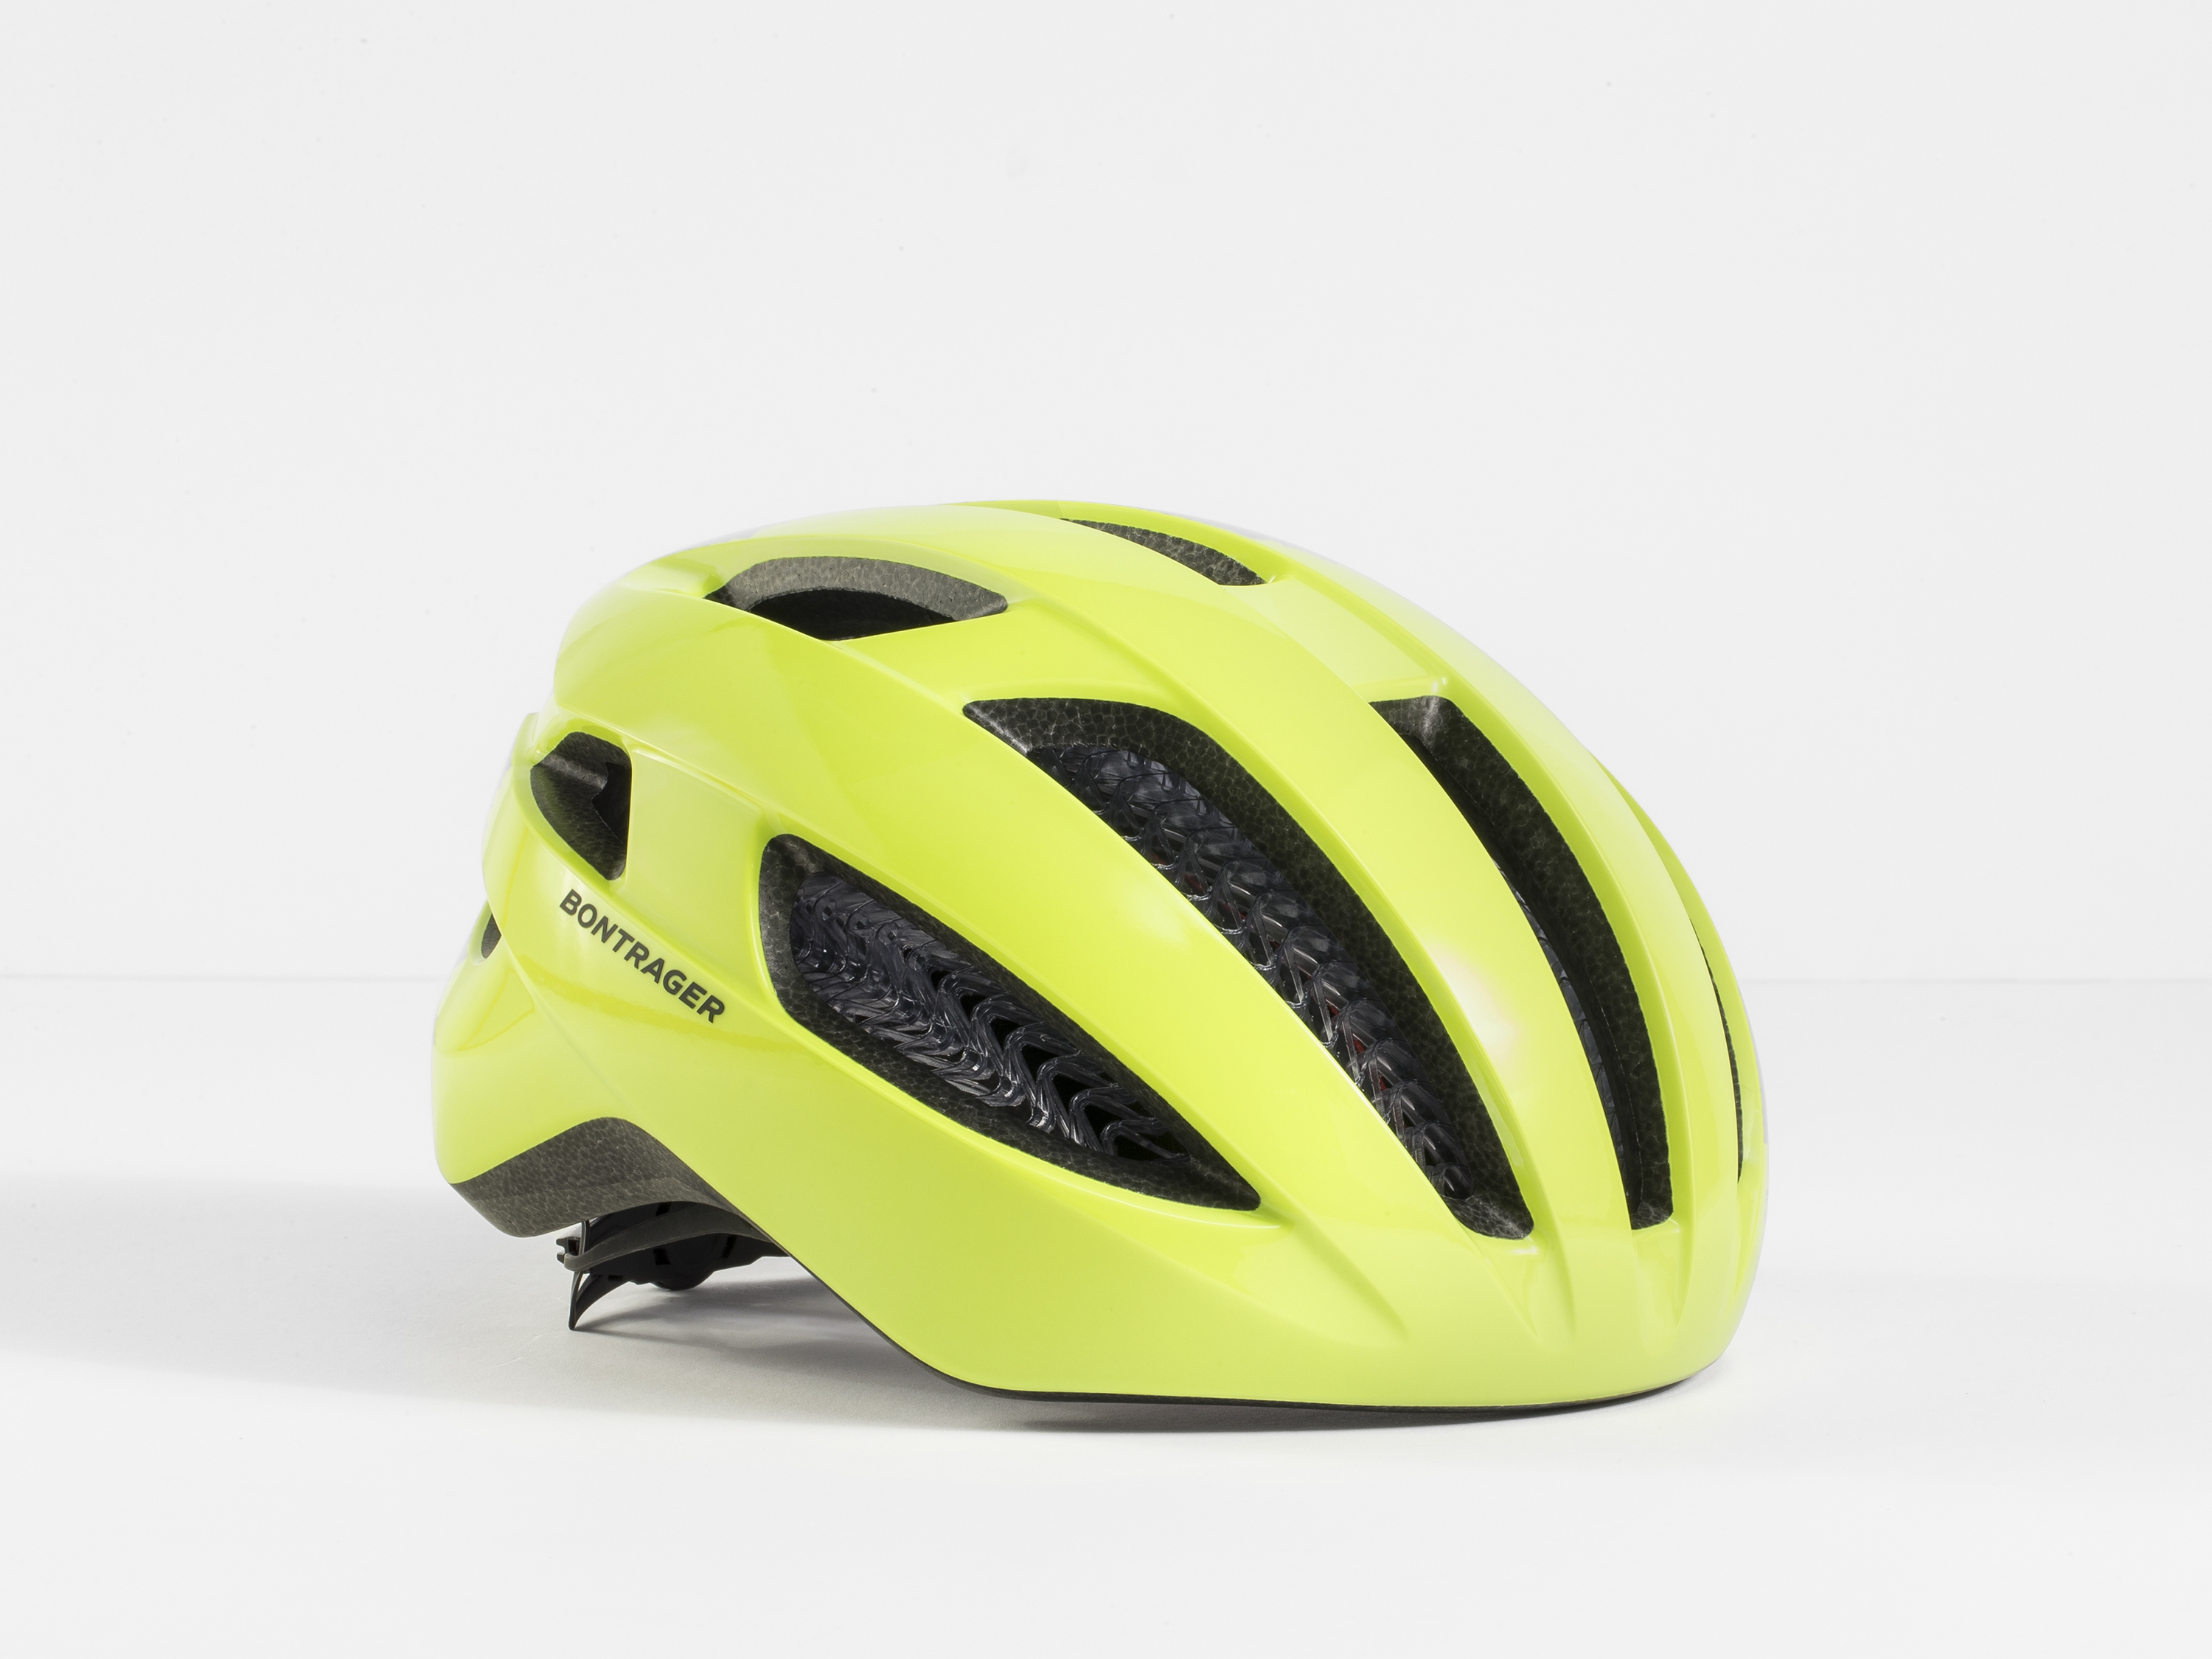 <a href="https://cycles-clement.be/product/bont-casque-starvos-wavecel-s-radioactive-yel/">BONT CASQUE STARVOS WAVECEL S RADIOACTIVE YEL</a>